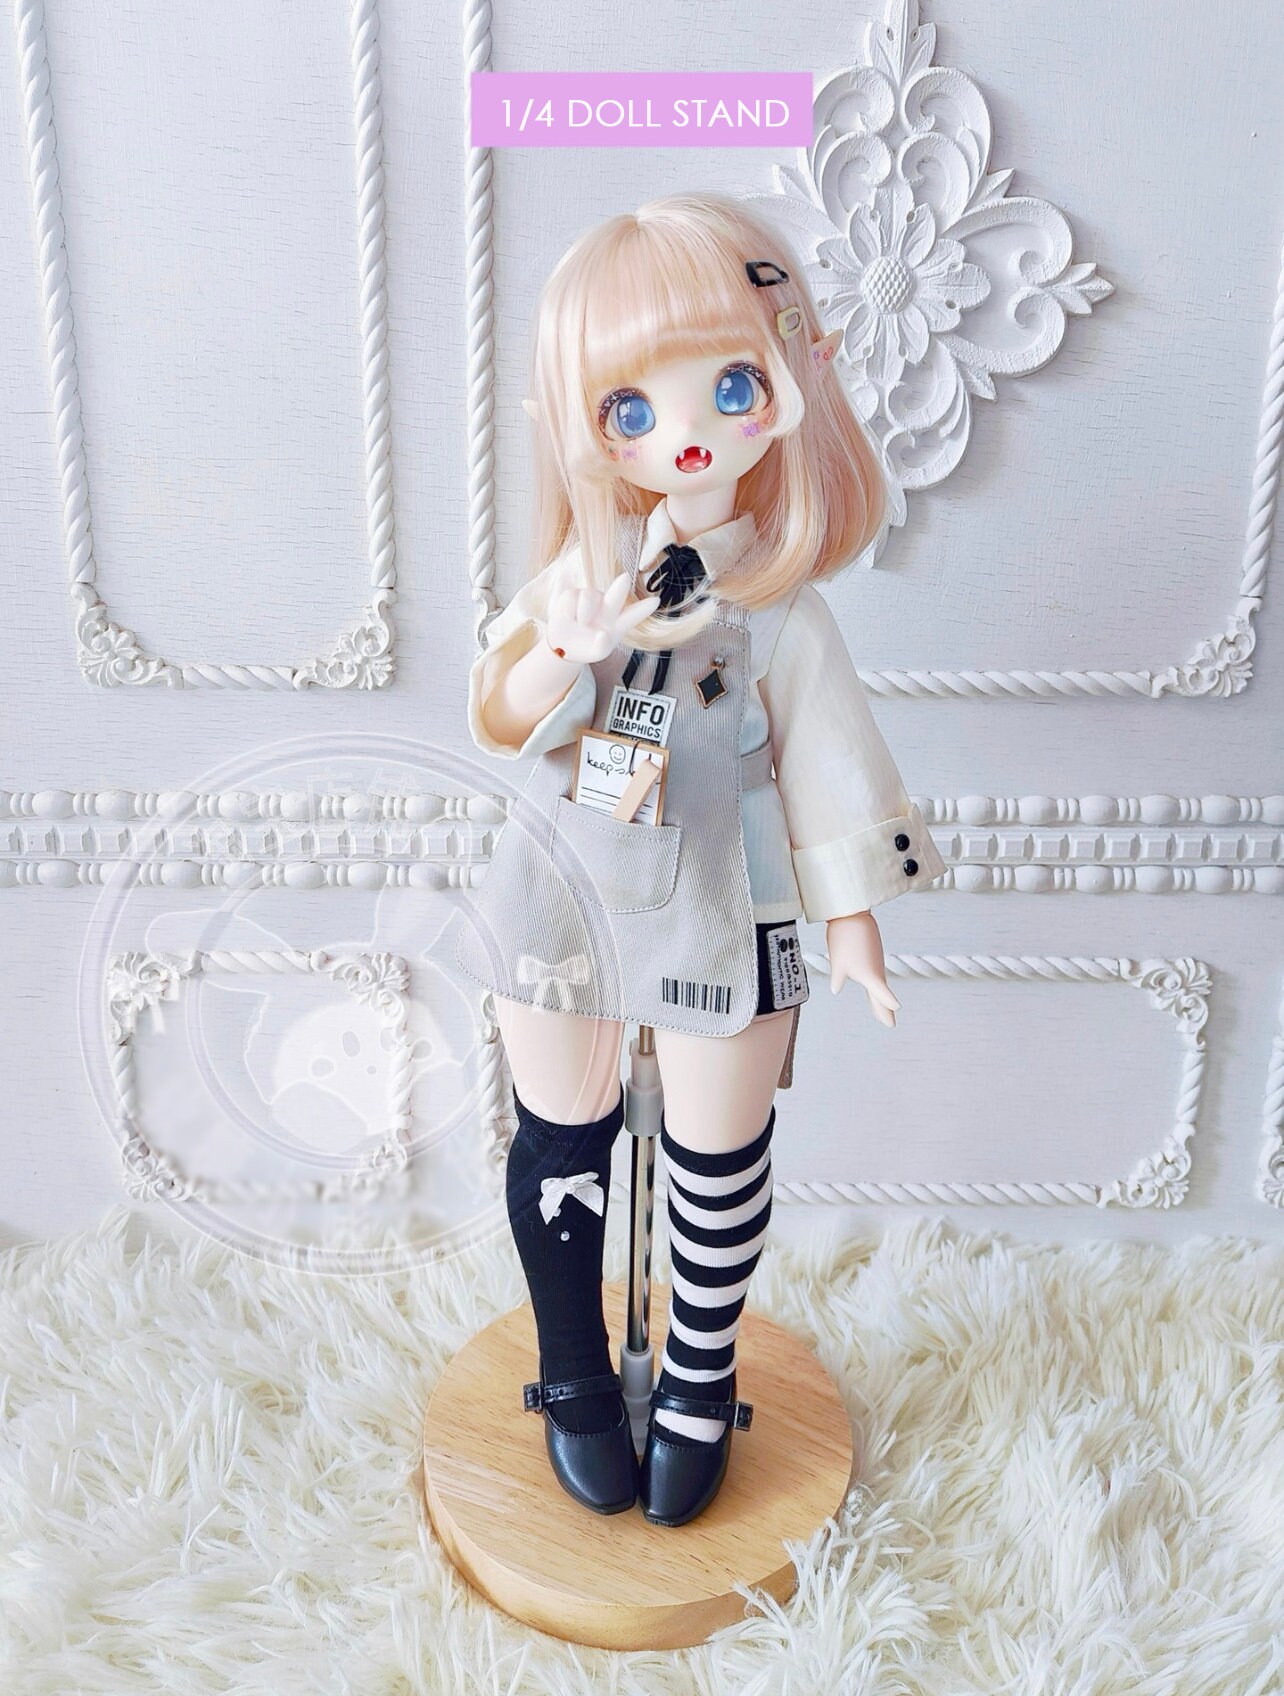 BJD Wig holder Stand Wooden Hair Display For 1/4 1/6 1/8 Doll